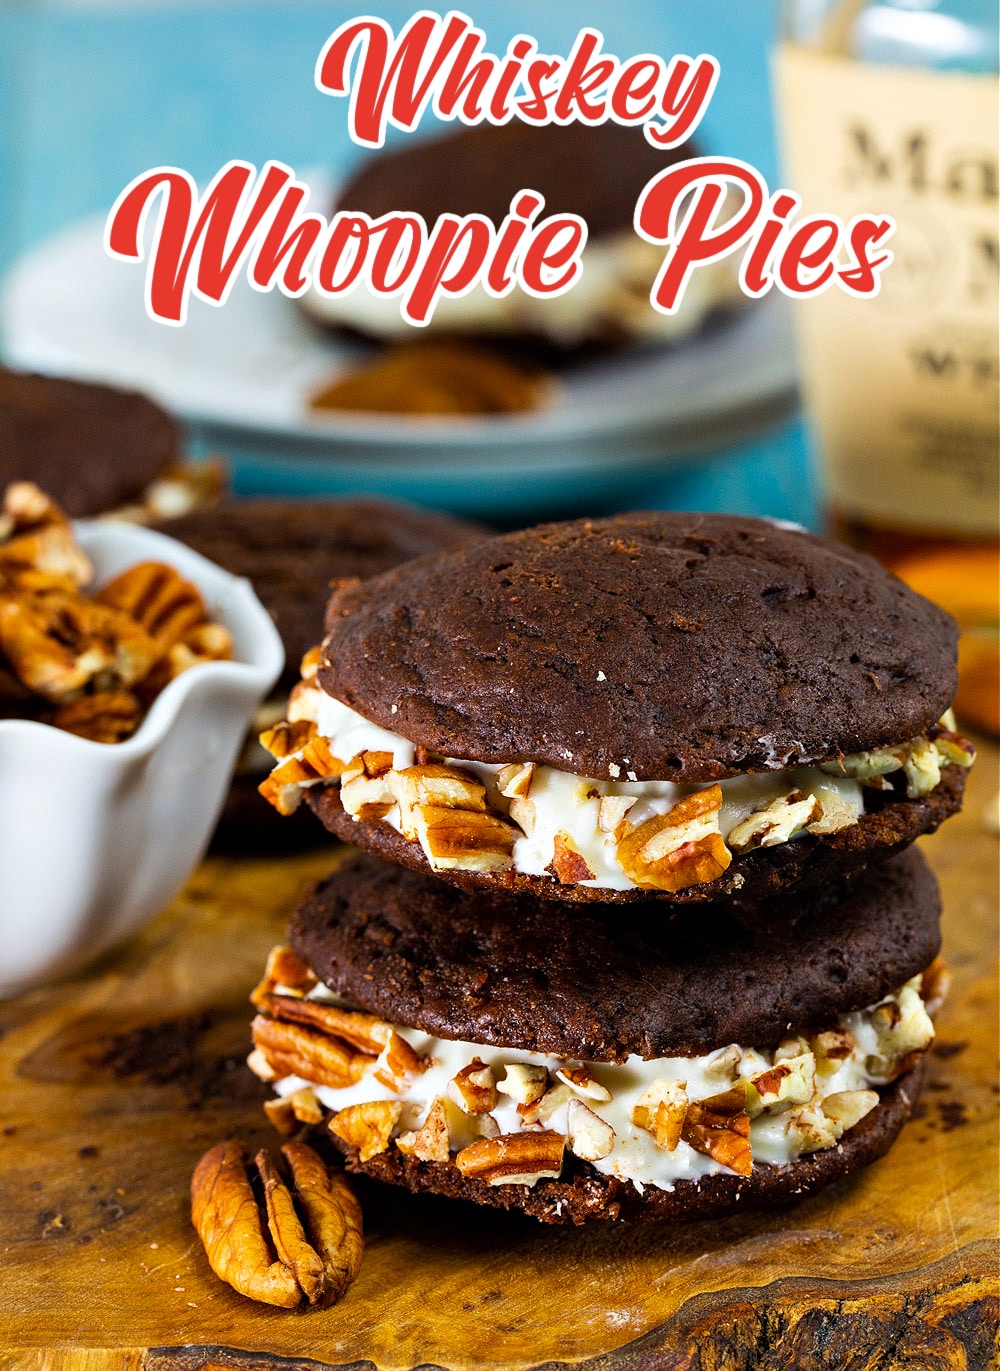 Whiskey Whoopie Pies stacked on a cutting board.